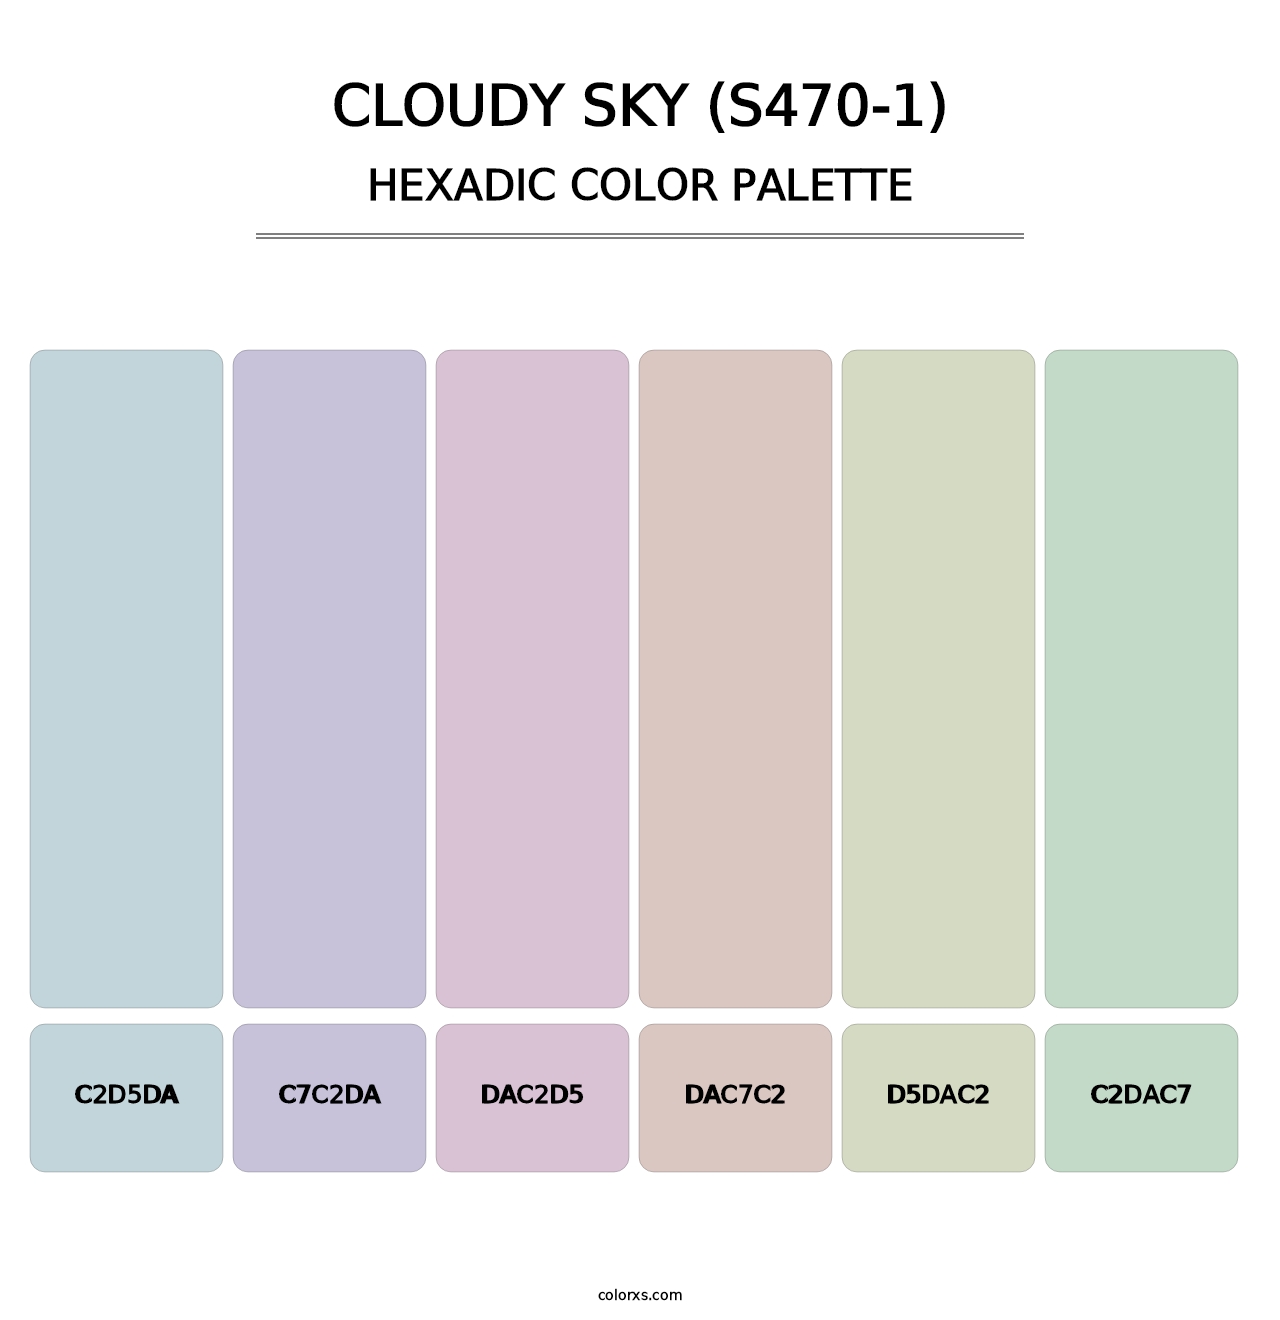 Cloudy Sky (S470-1) - Hexadic Color Palette